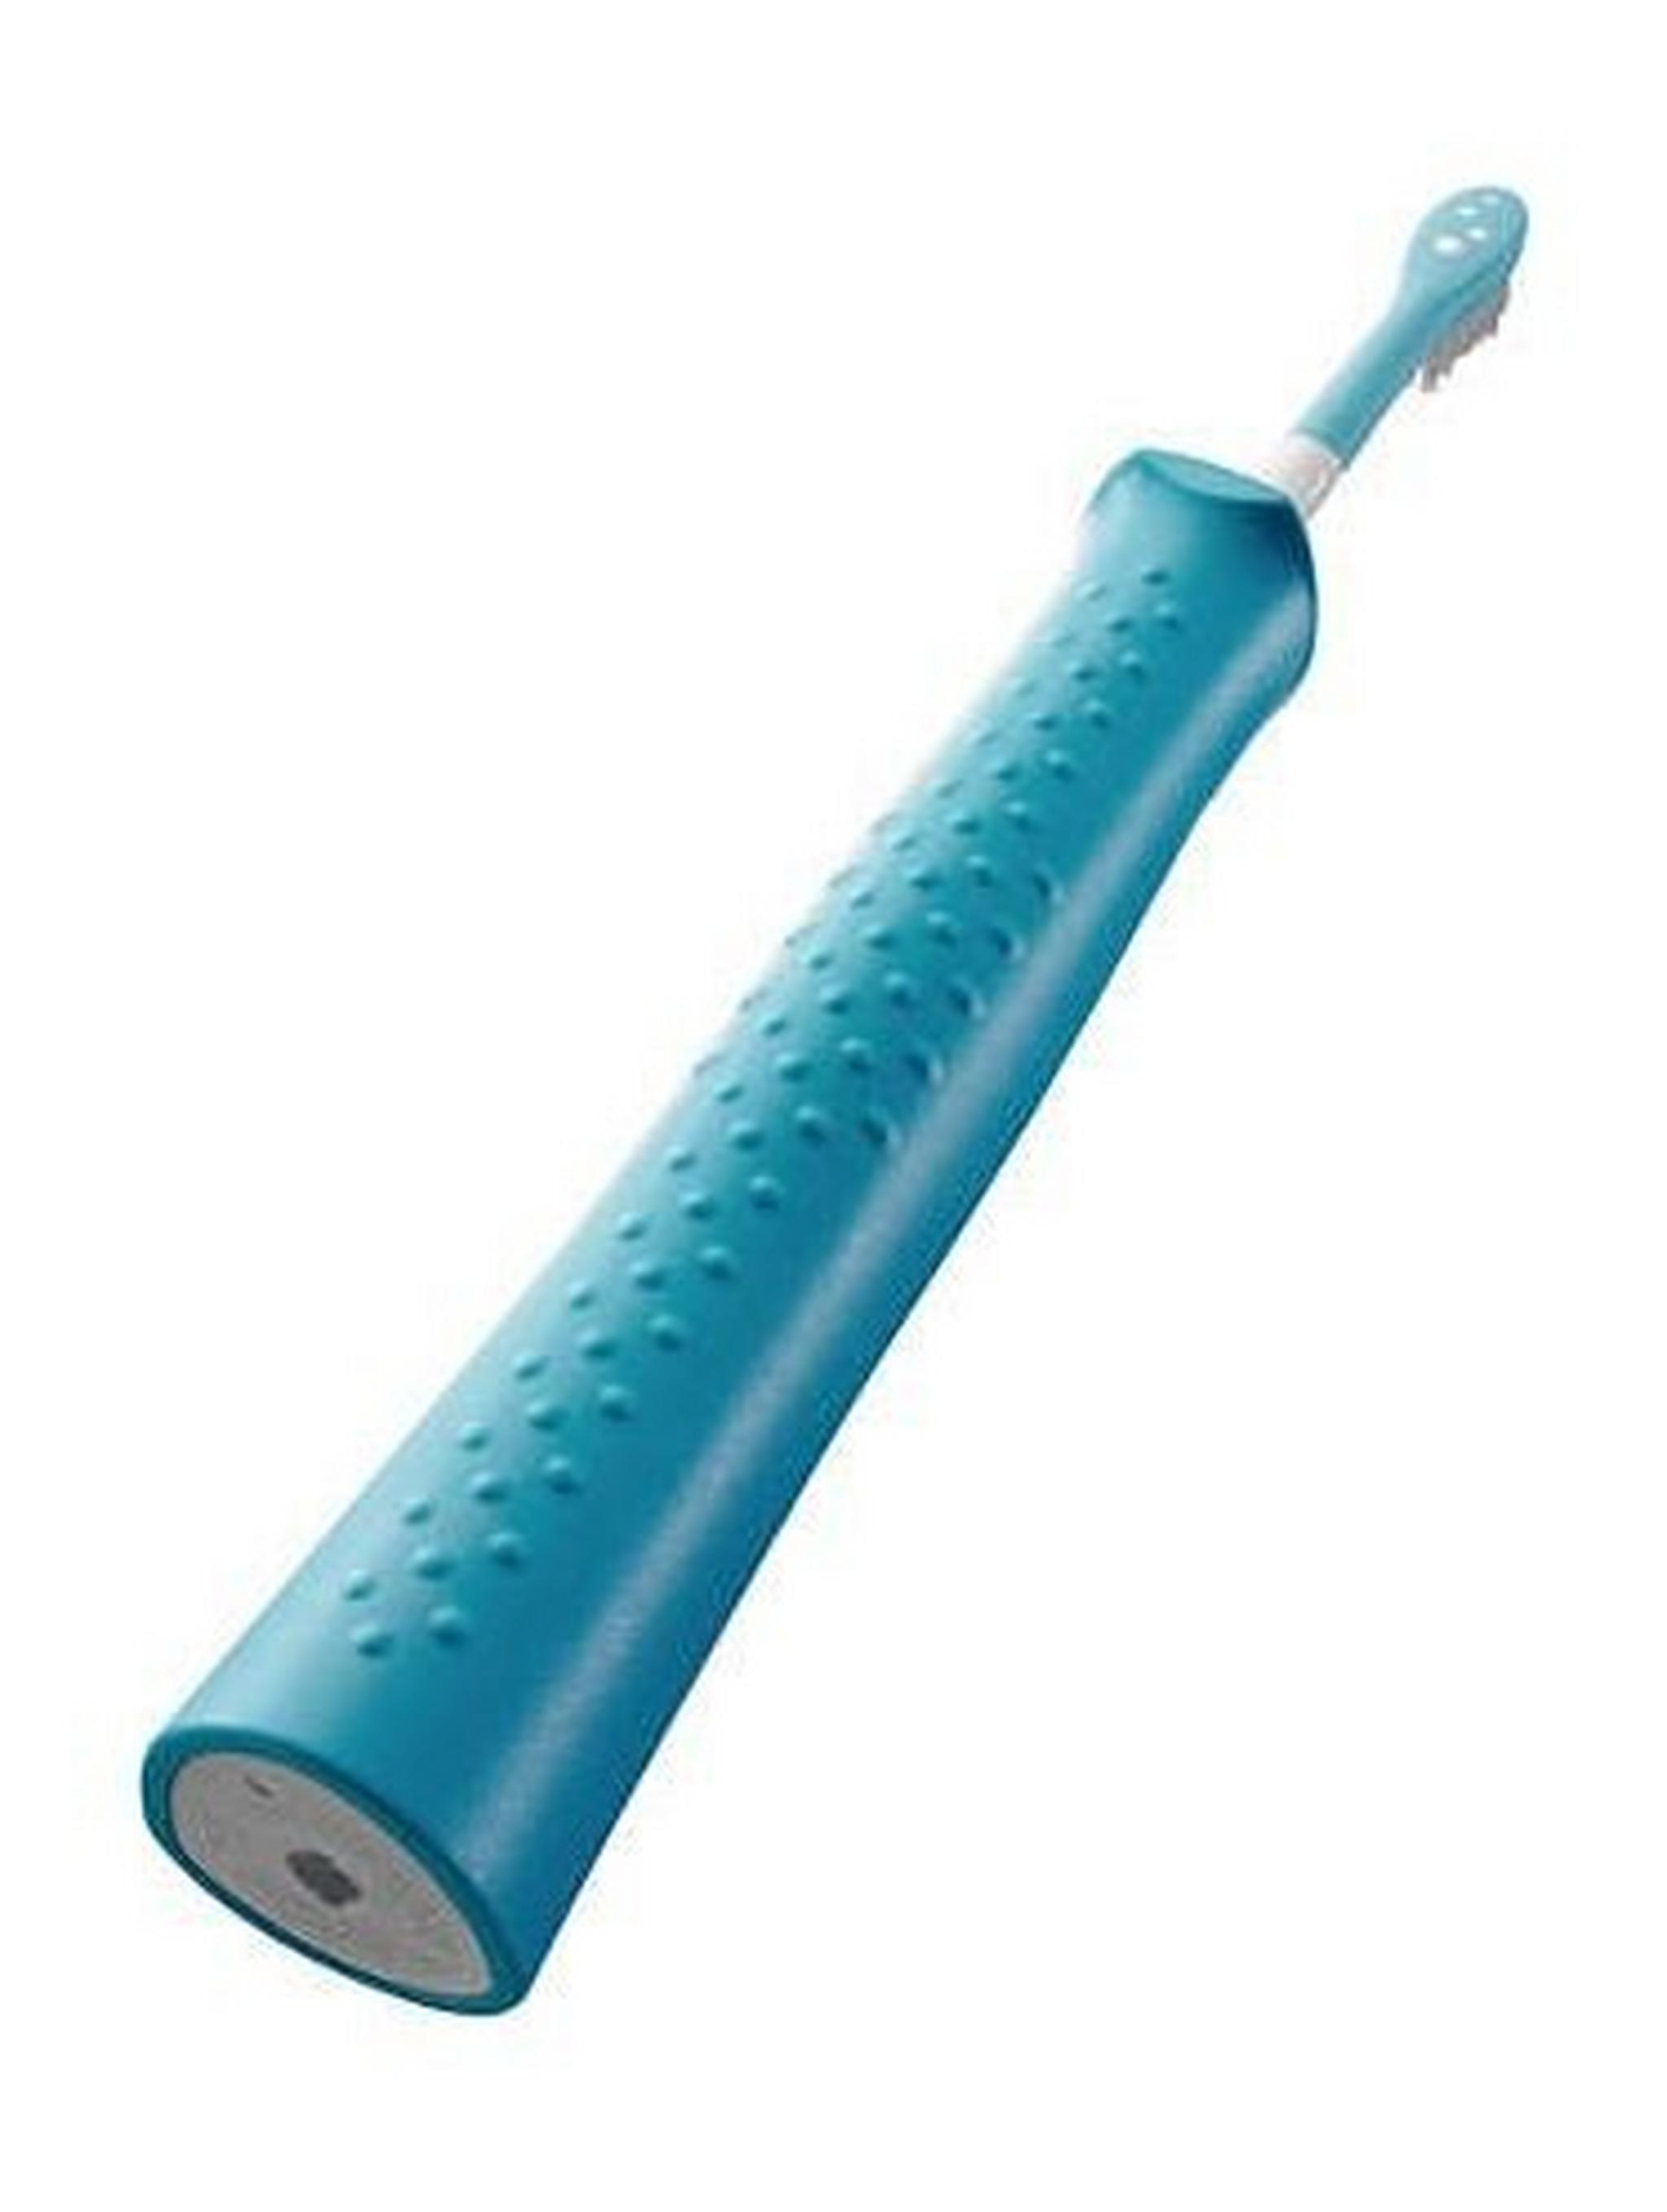 Philips Sonicare For Kids Sonic Electric Toothbrush (HX6311/07) – Blue / White